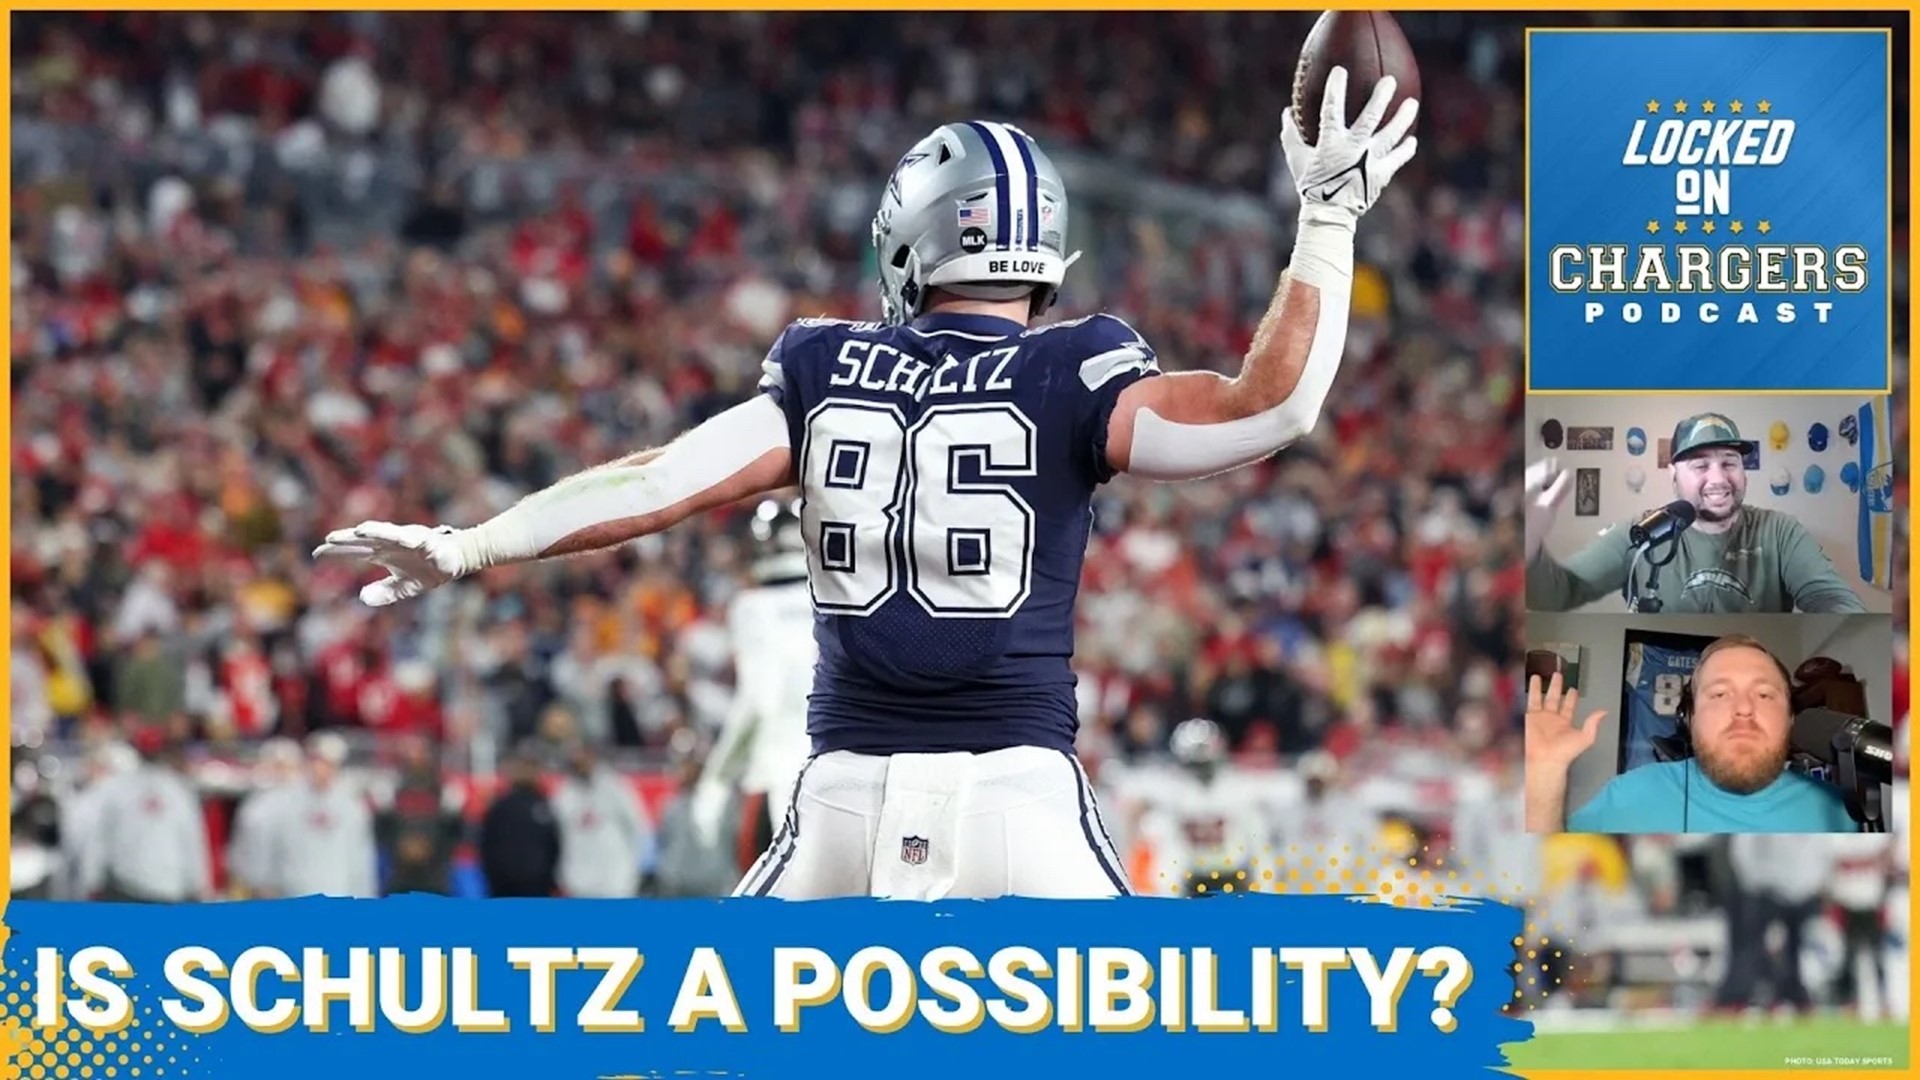 Free Agent Dalton Schultz would be a perfect fit for the Los Angeles Chargers new offense after blossoming under offensive coordinator Kellen Moore.